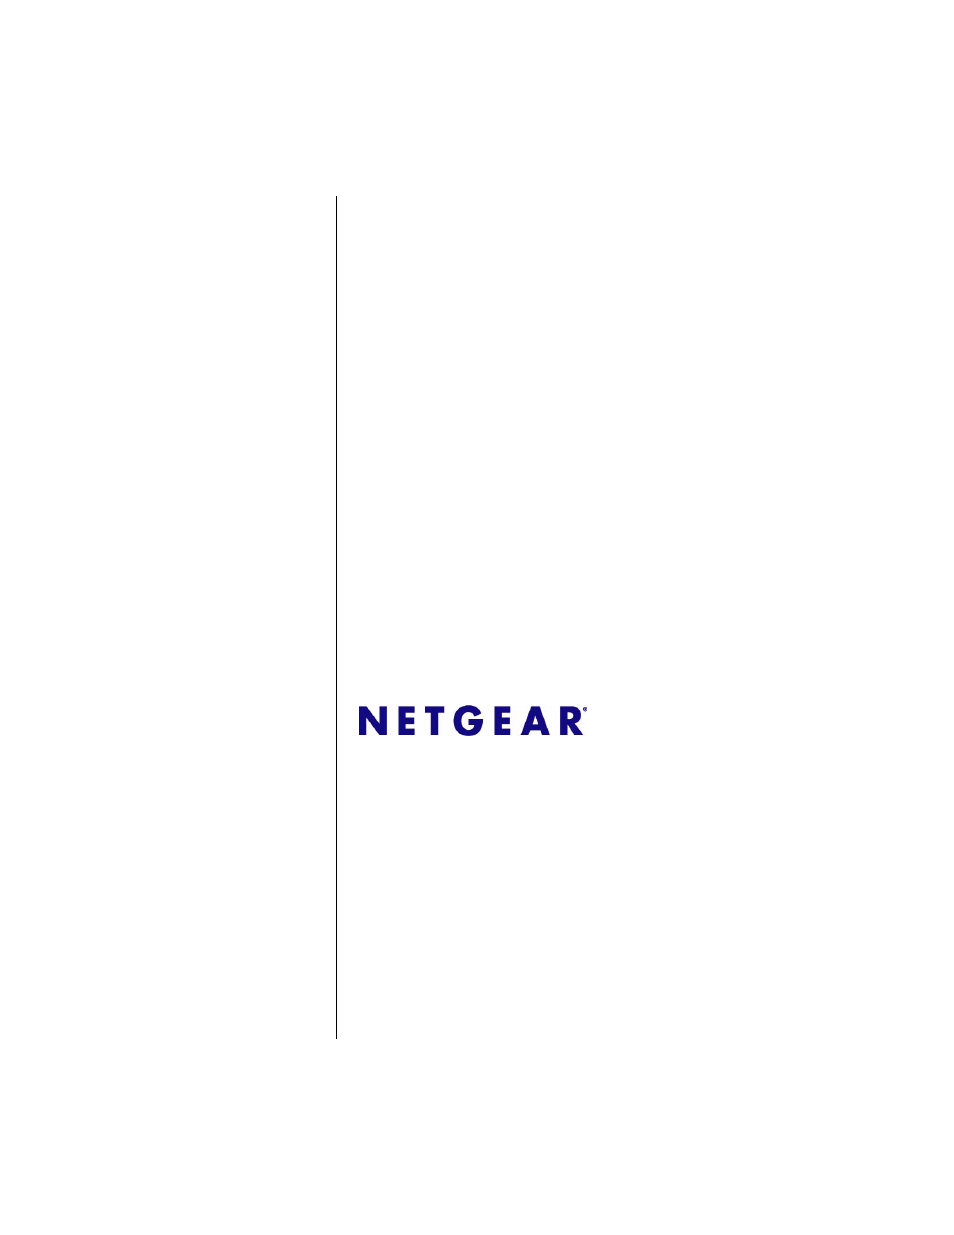 NETGEAR 7000 Series Managed Switch User Manual | 220 pages